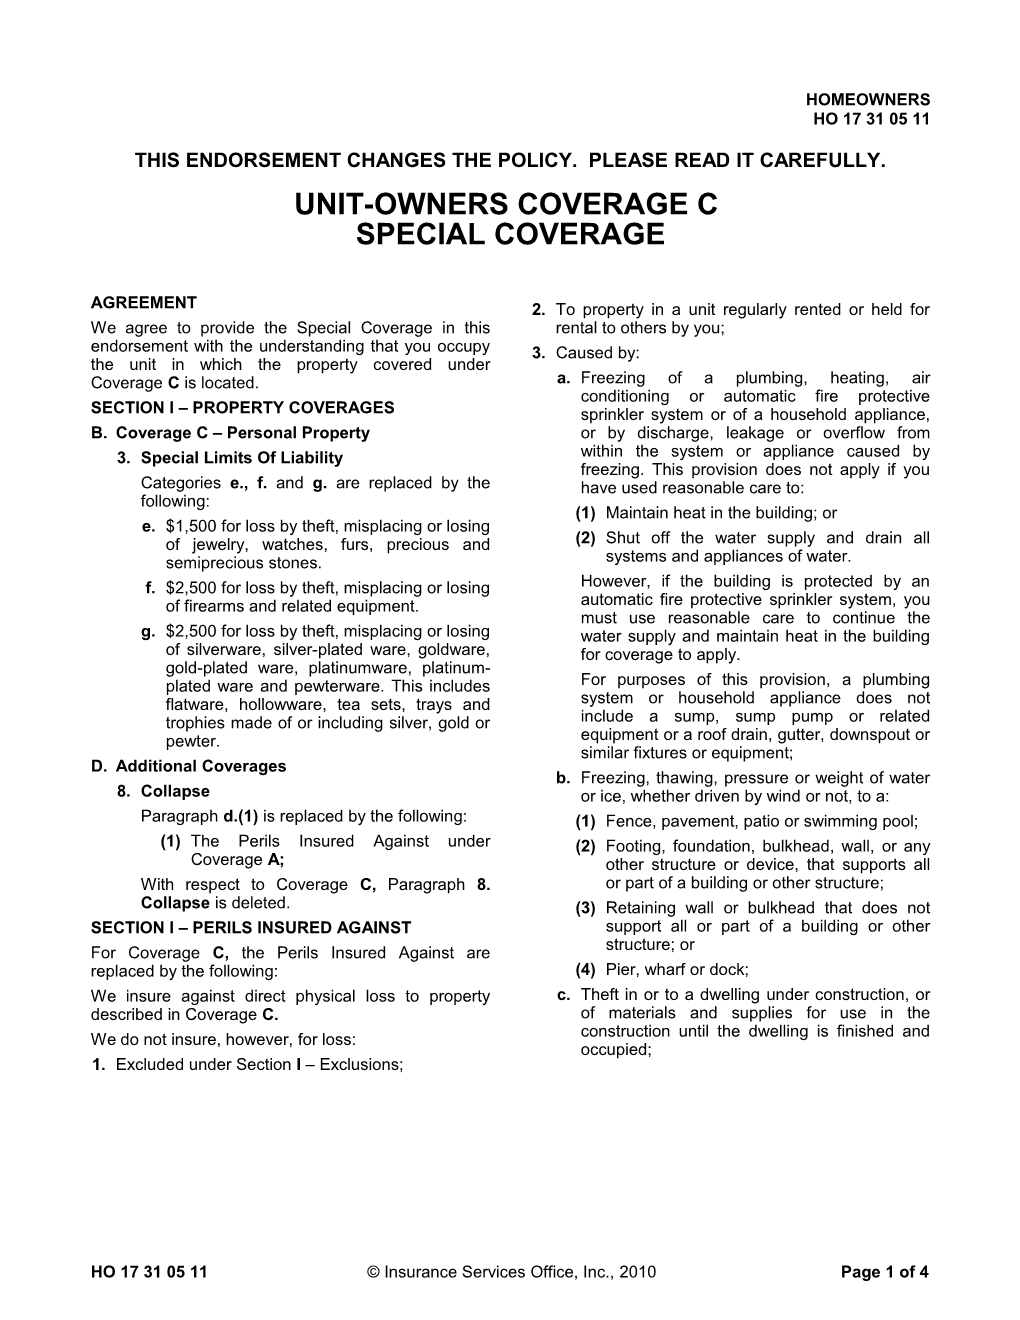 Unit-Owners Coverage C Special Coverage